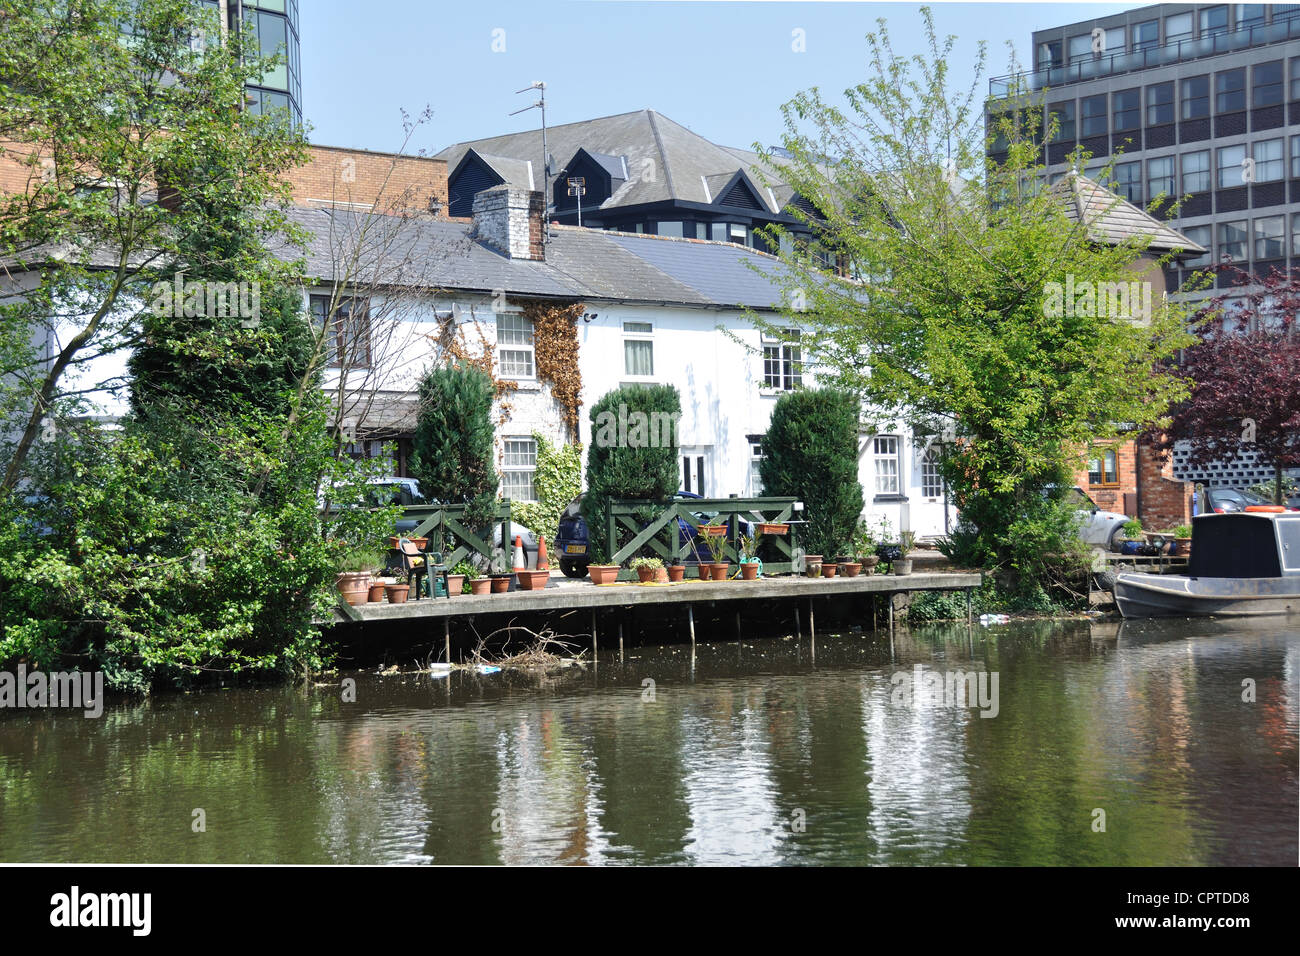 A house on the kennet canal, Reading, Berkshire, U.K. Stock Photo